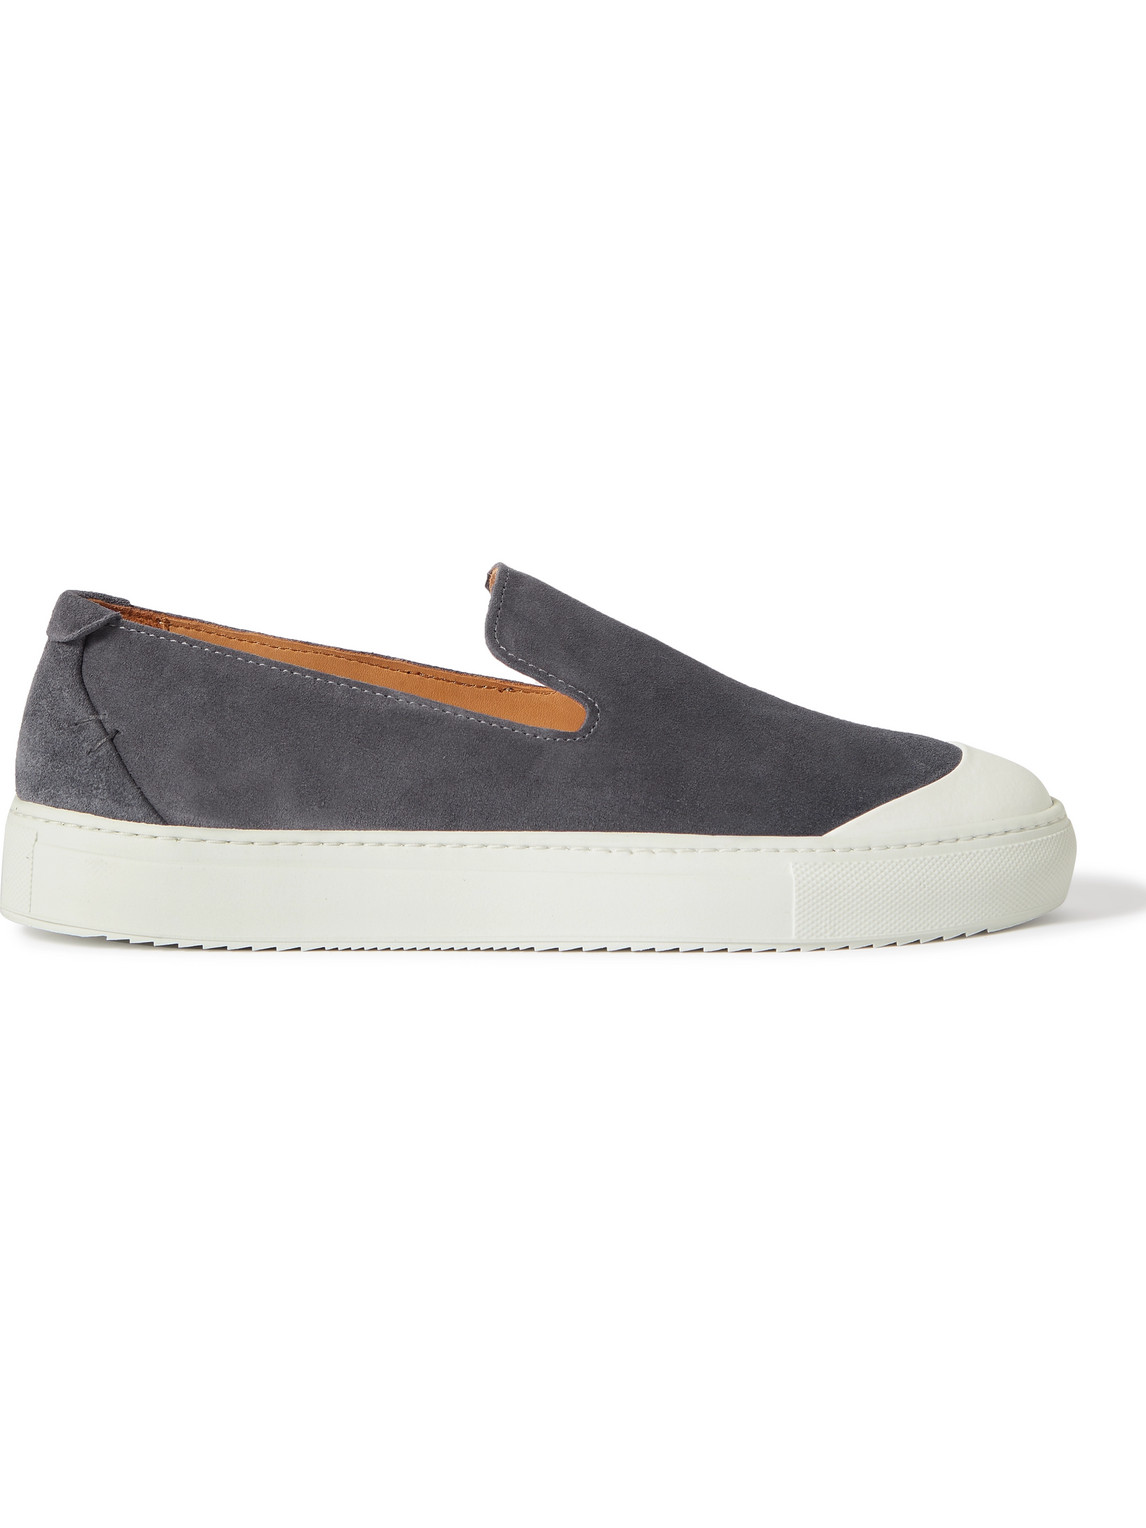 Mr P. Larry Regenerated Suede By Evolo® Slip-on Sneakers In Blue